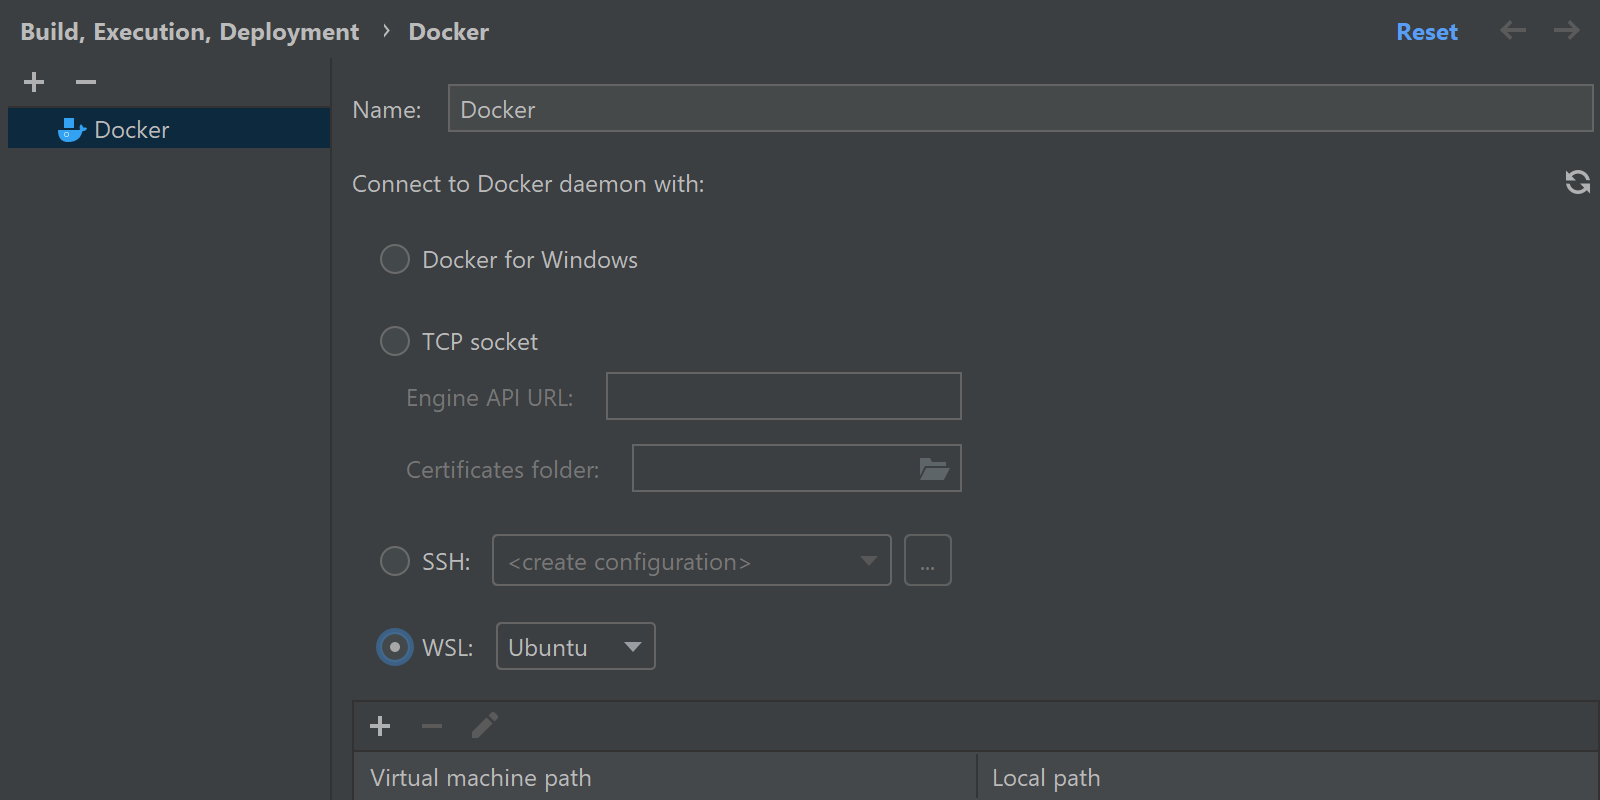 New WSL option in the Docker connection settings 